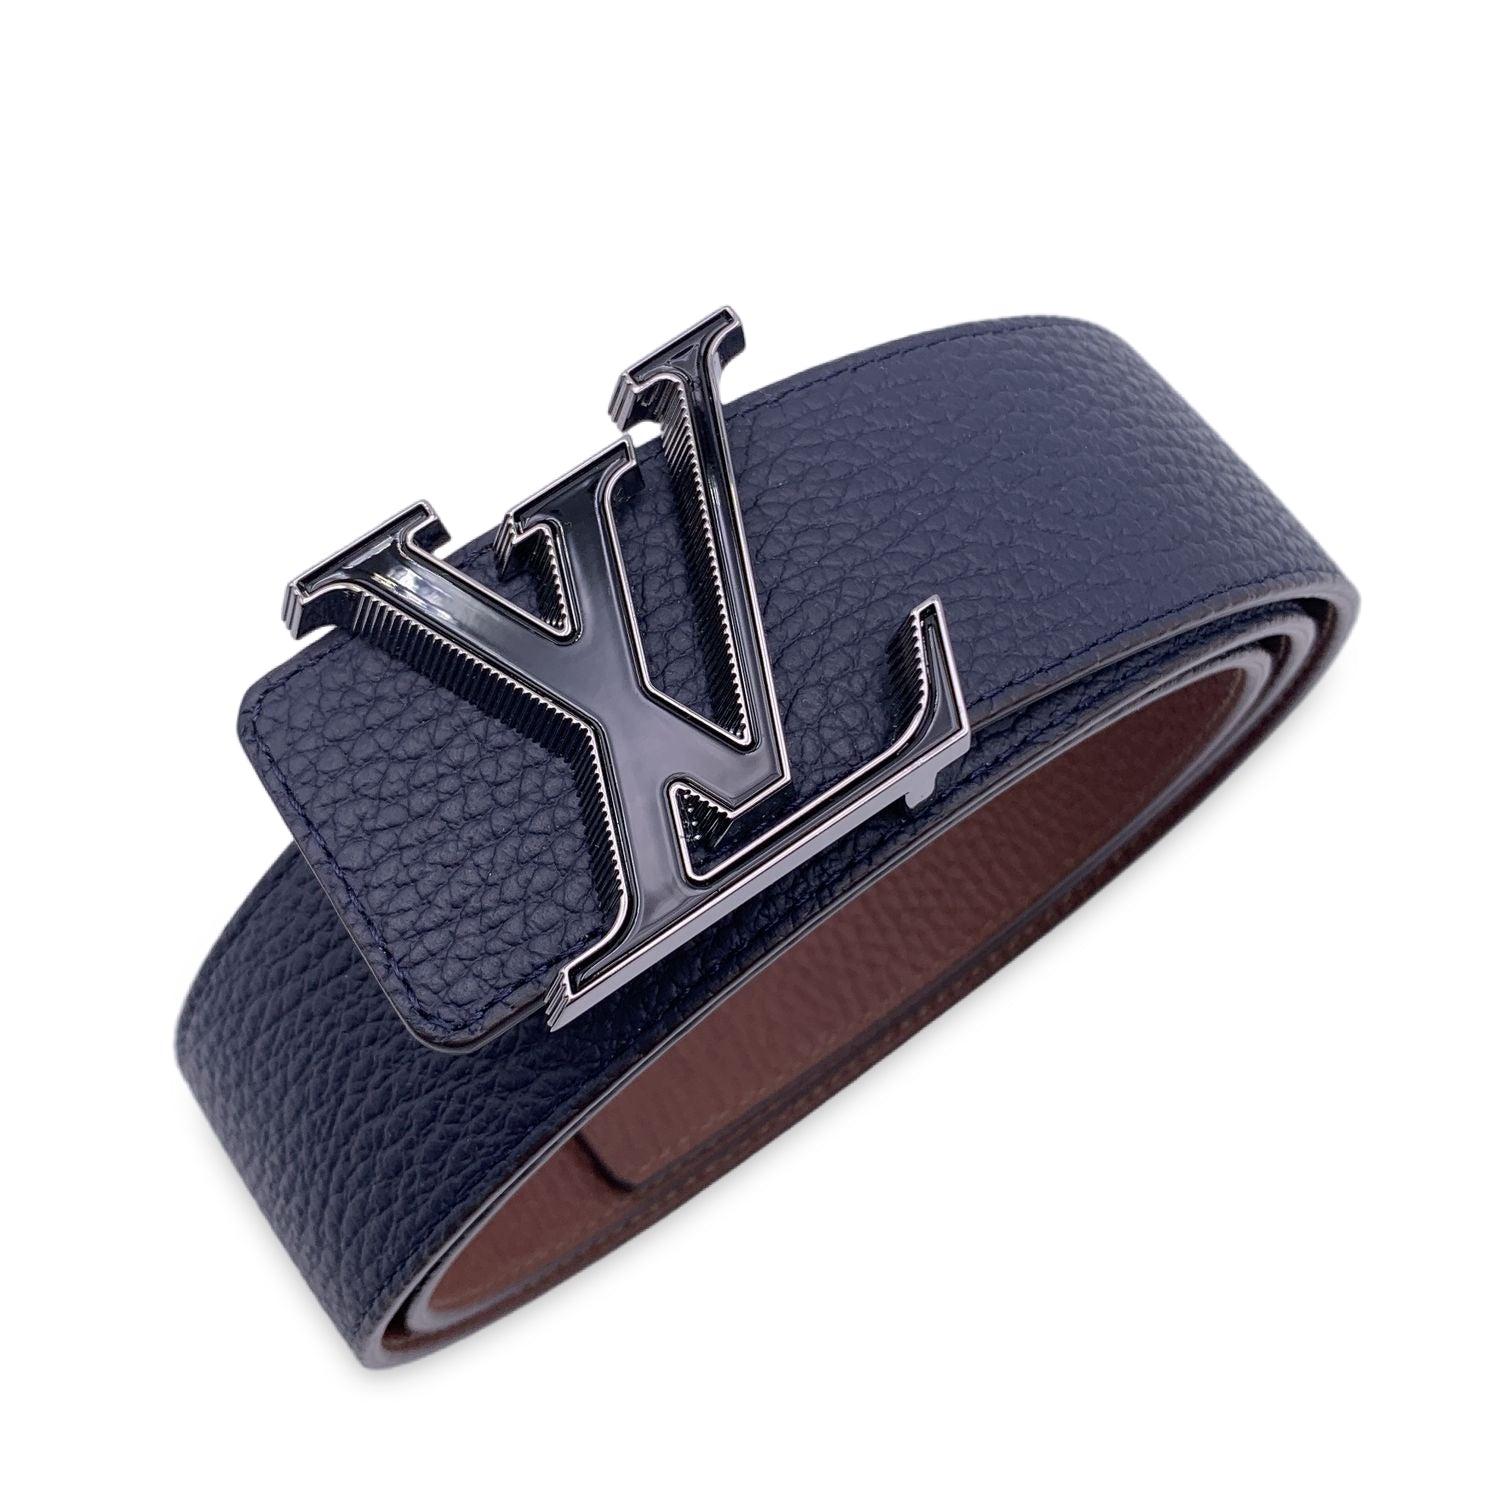 This beautiful belt will come with a Certificate of Authenticity provided by Entrupy. The certificate will be provided at no further cost. LOUIS VUITTON reversible 'LV tilt' belt. Made of fine blue and brown Taurillon leather. The belt features a